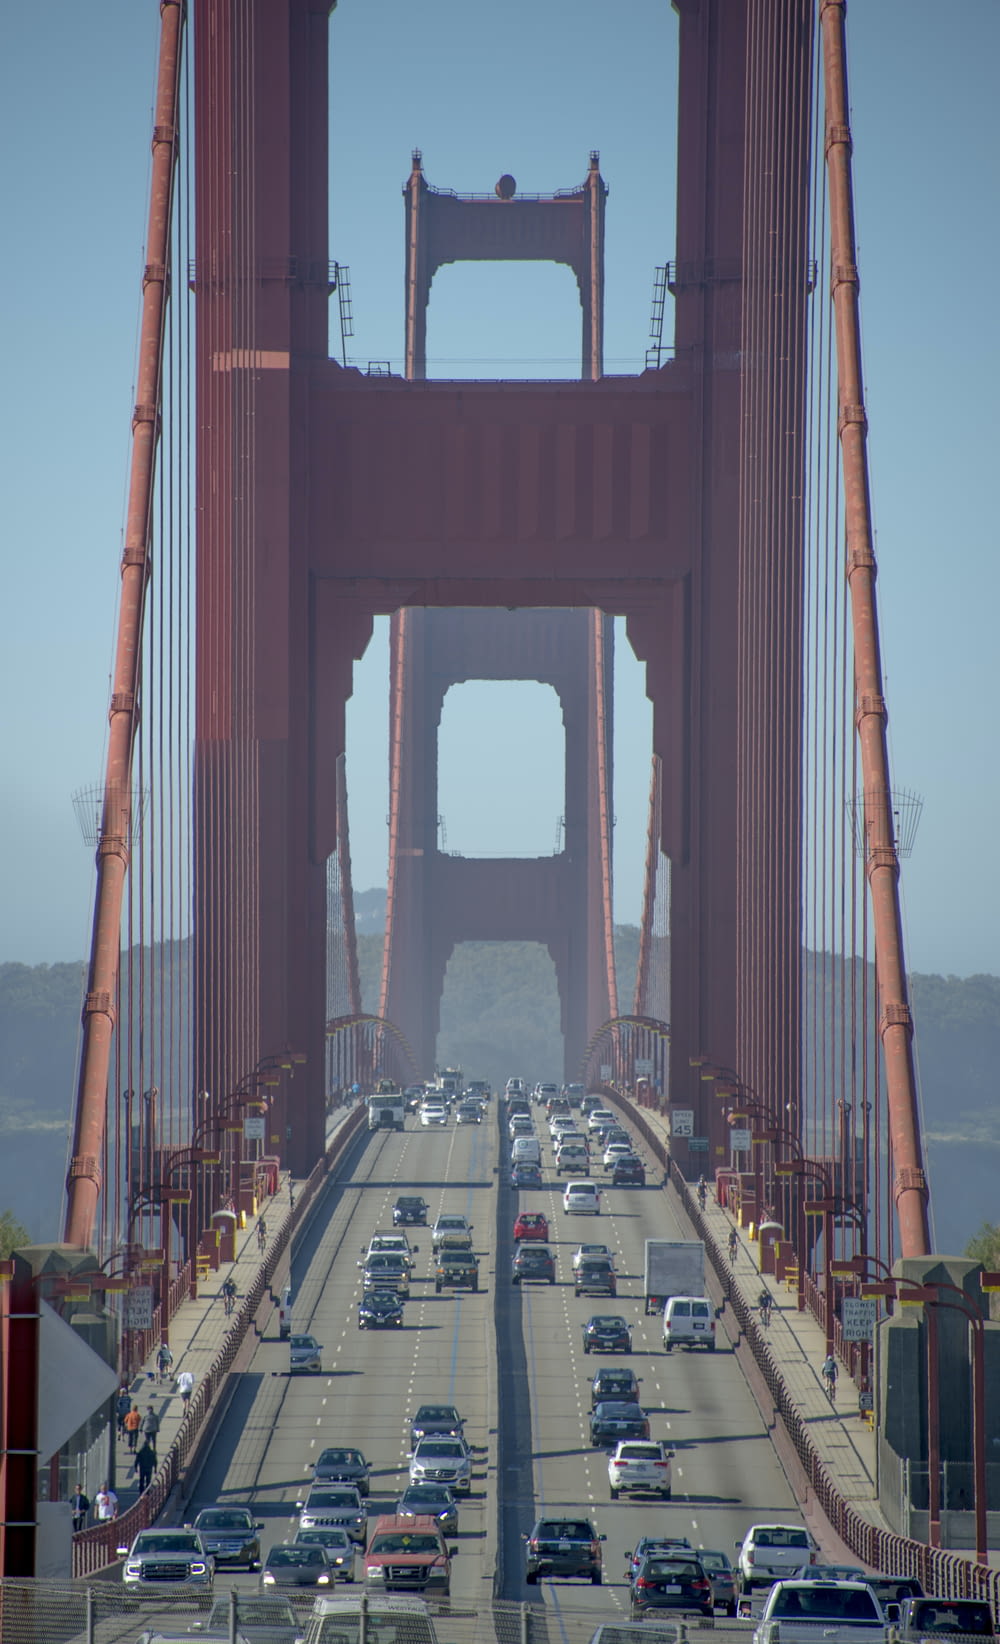 a view of the golden gate bridge from a distance